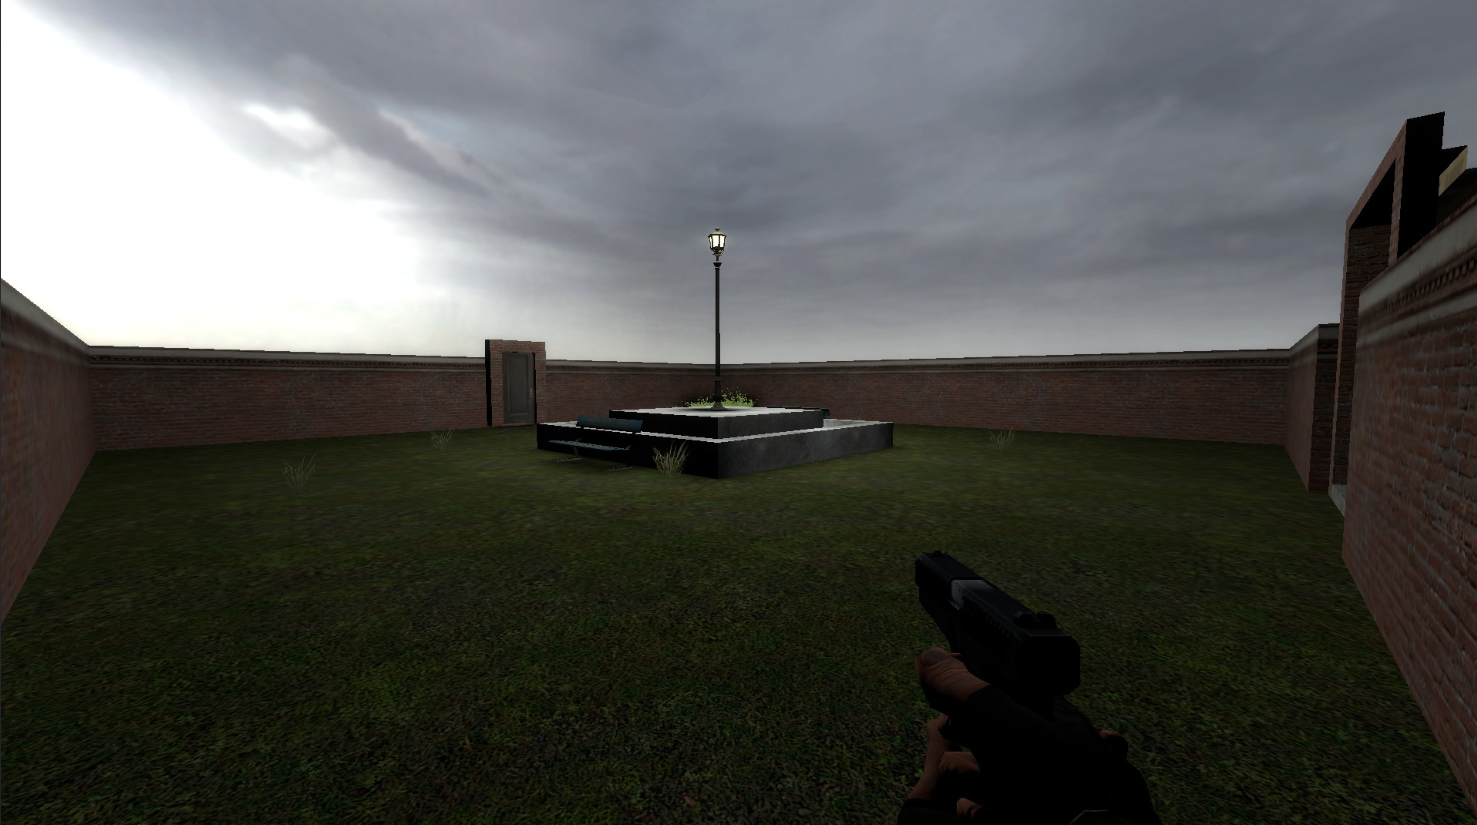 A lamppost stands in the center of a sparse, walled garden with a door on one side. The viewer is holding a pistol.